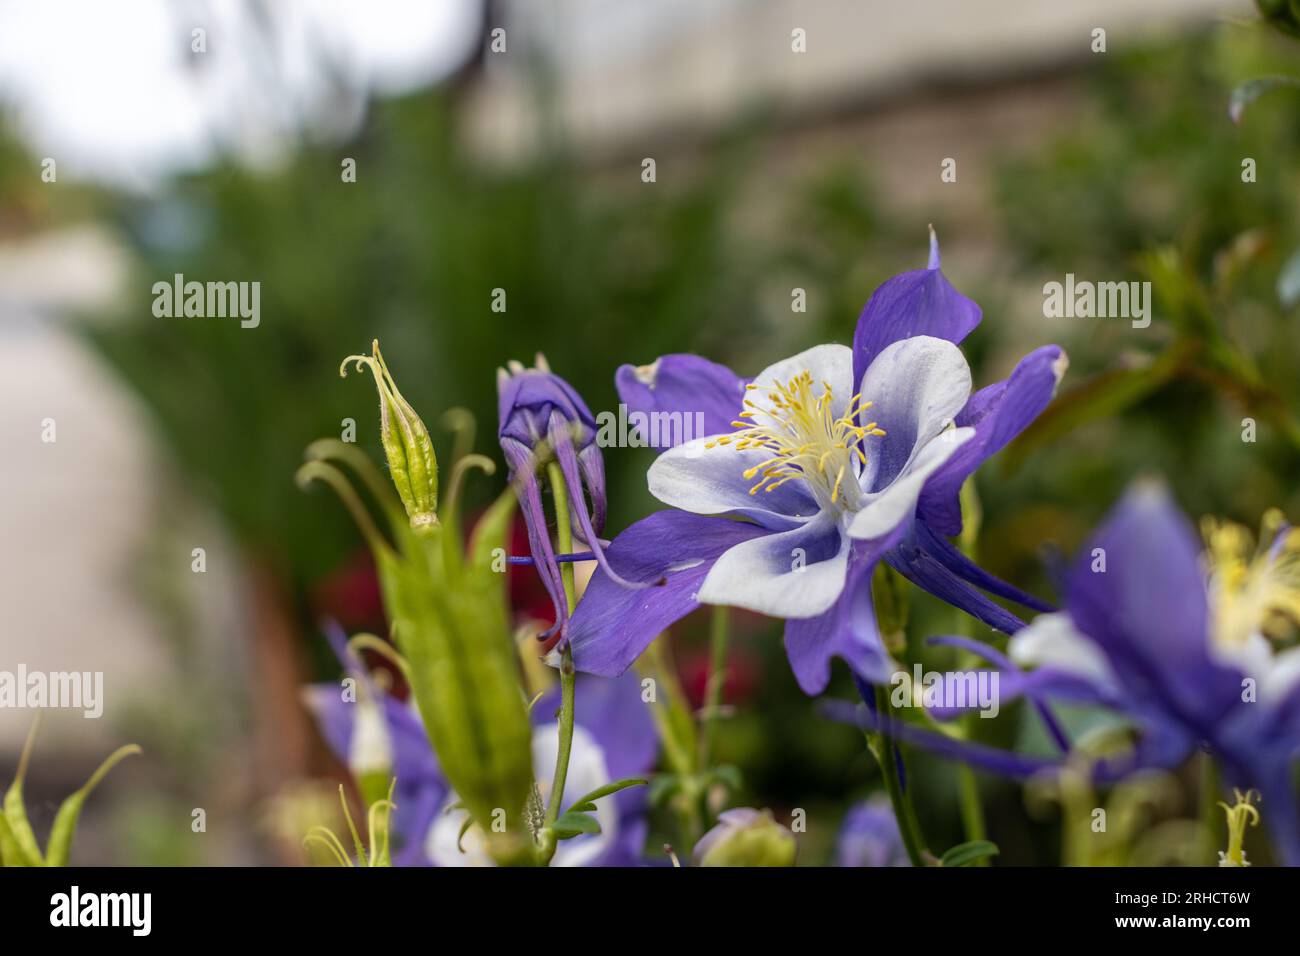 A close-up of purple and white columbine flower - five petals with white tips and white center - yellow stamens - blurred green background - garden or Stock Photo